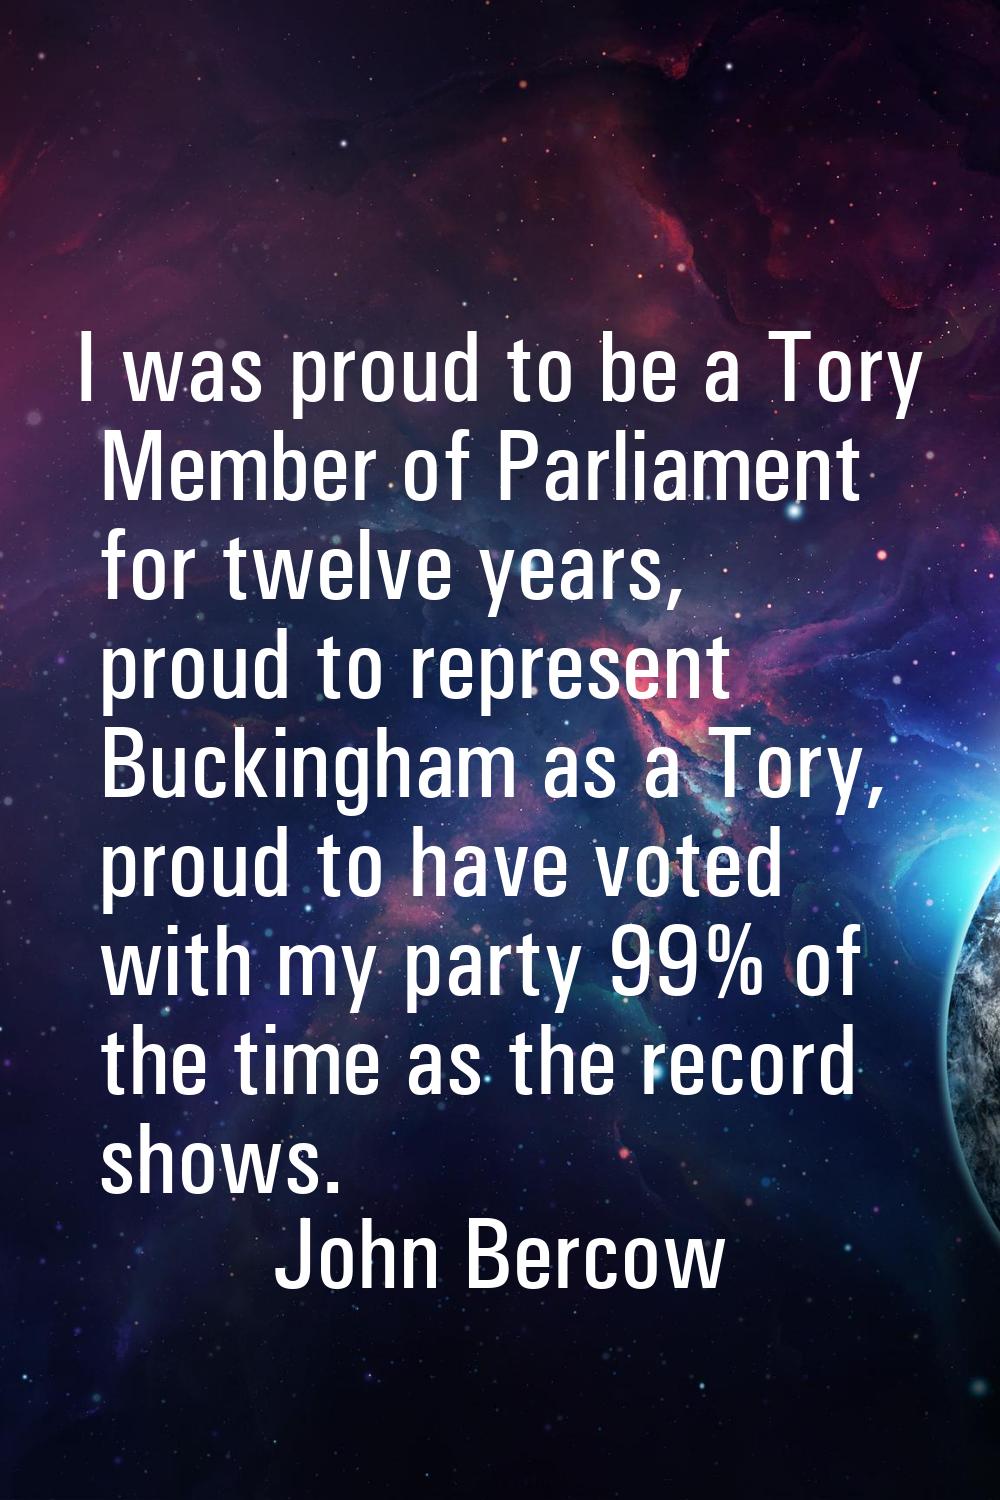 I was proud to be a Tory Member of Parliament for twelve years, proud to represent Buckingham as a 